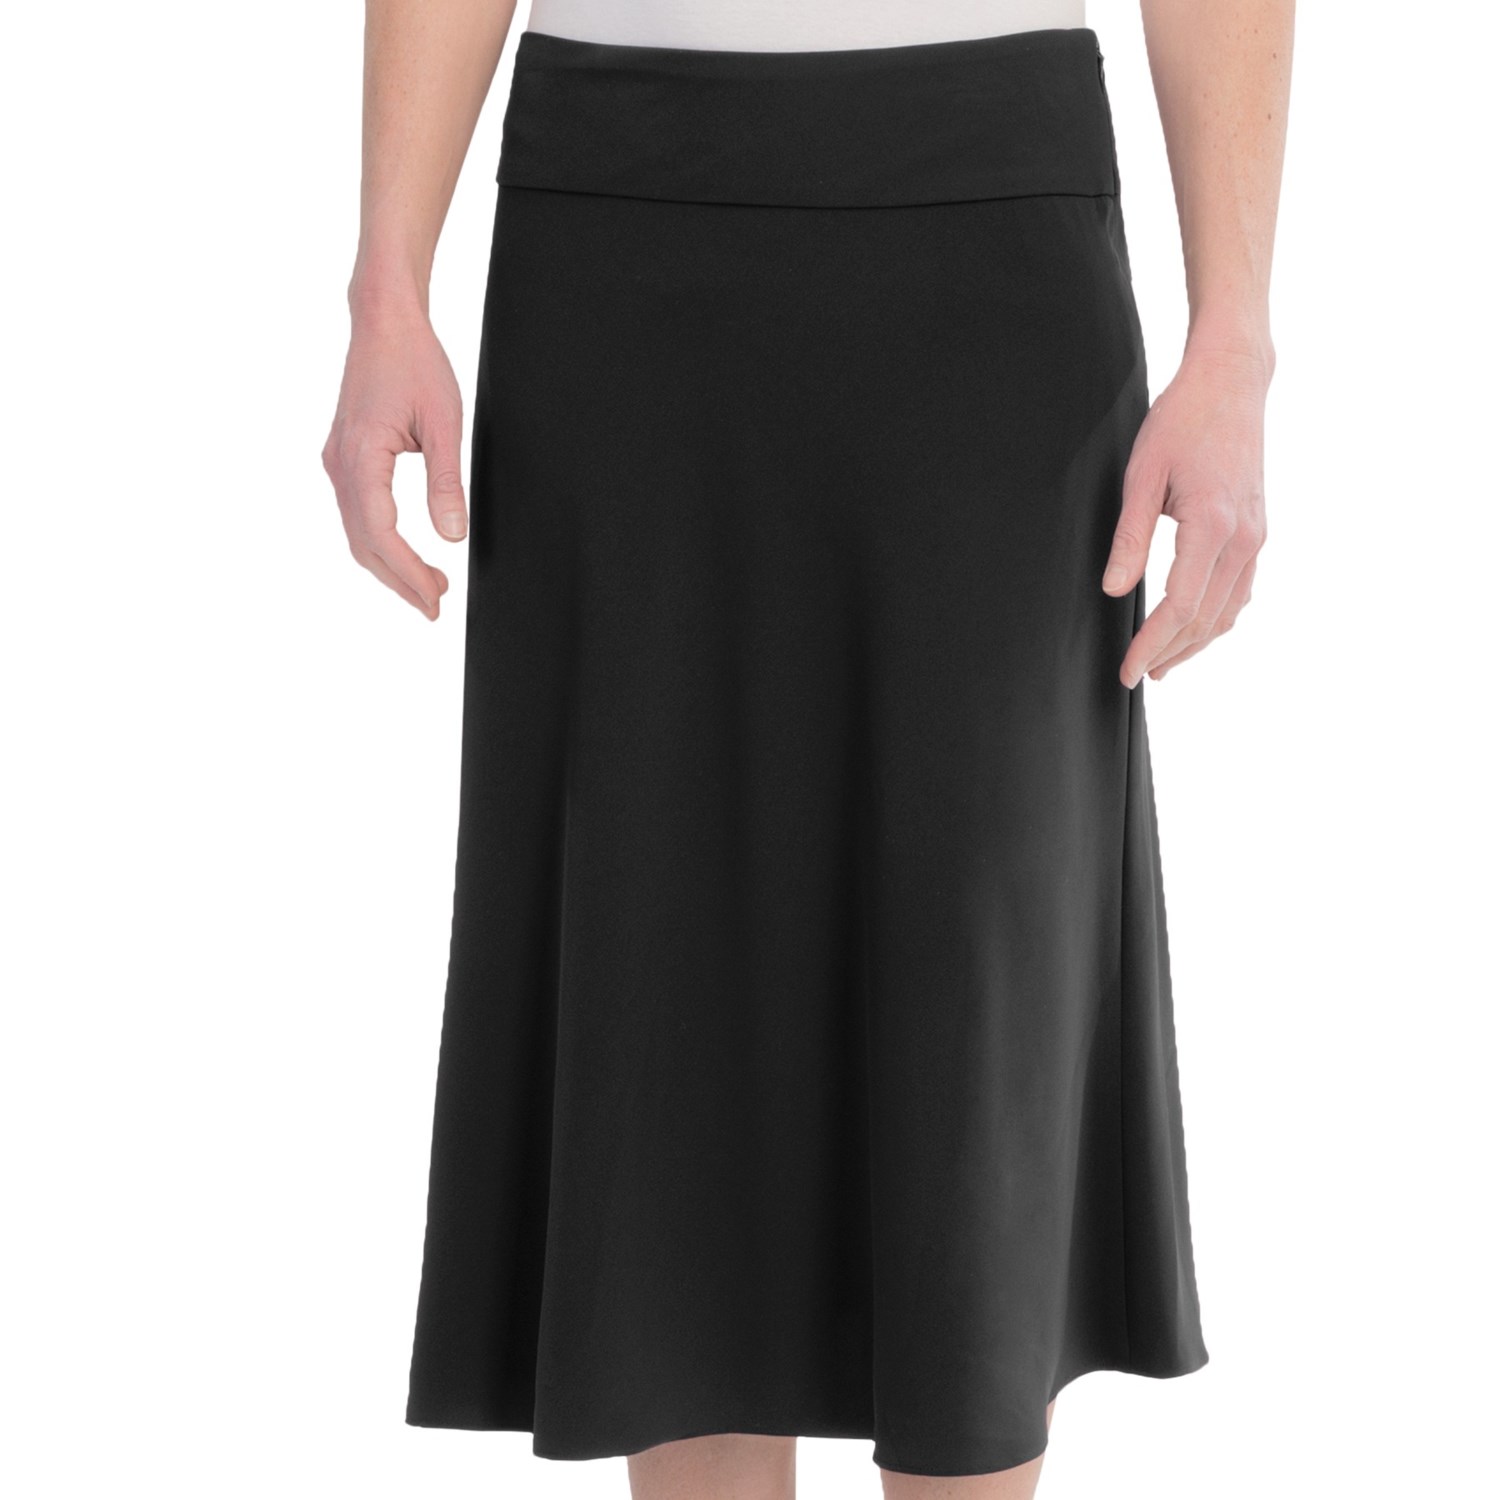 Pendleton Travel Tricotine Belle Skirt (For Women) 8861X - Save 56%